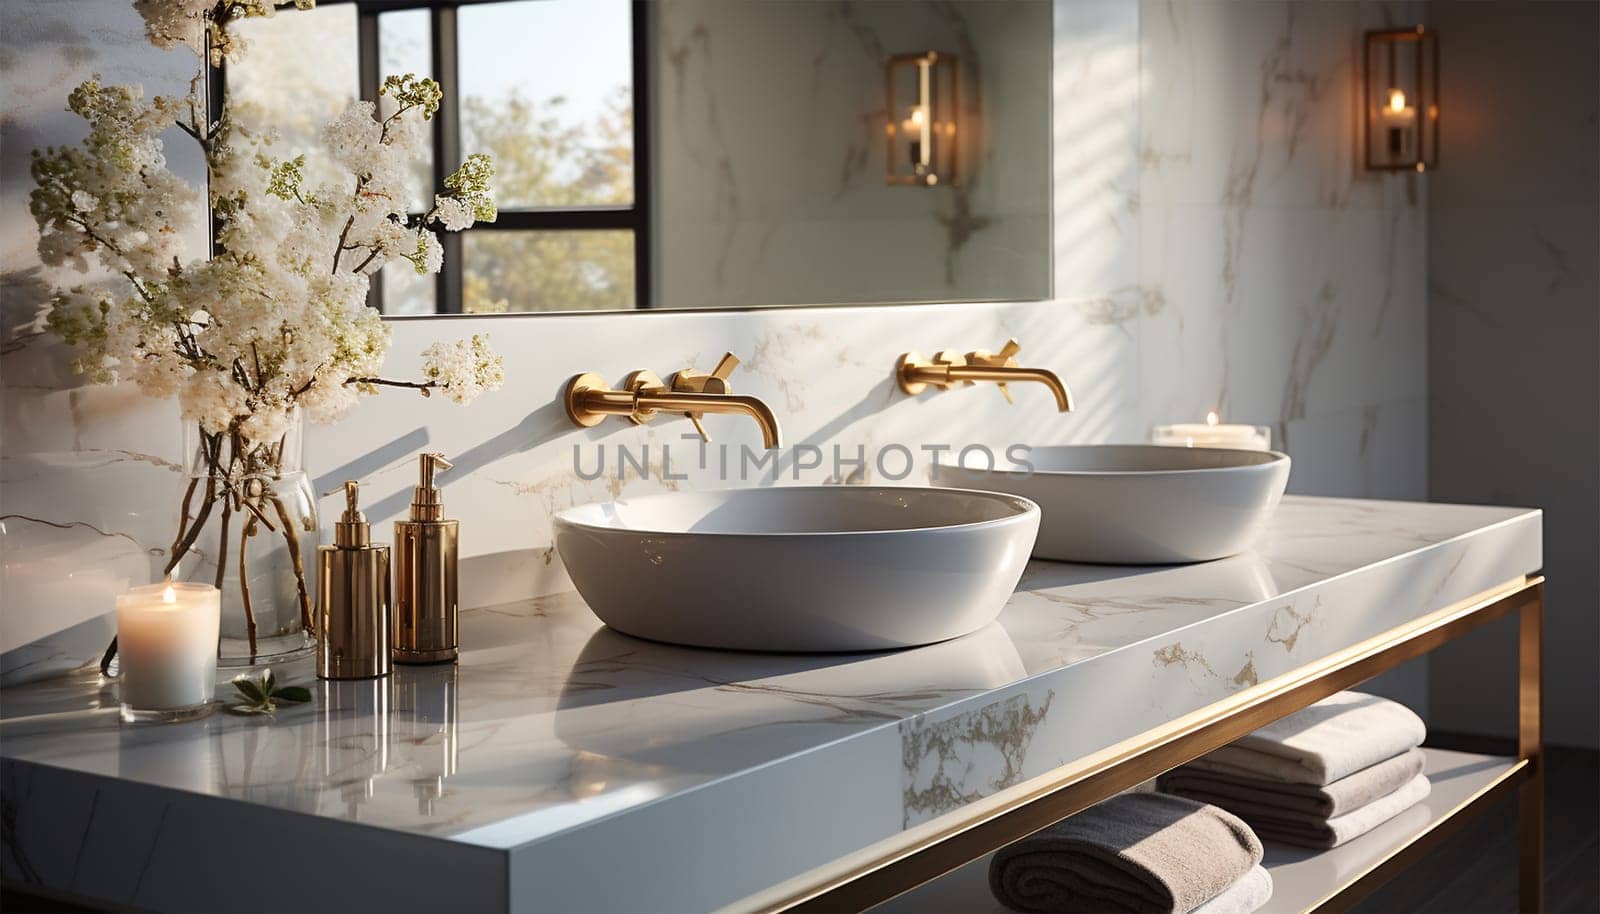 minimalistic bathroom featuring a natural stone countertop with a white sink, attached to a white wall. This mockup-ready countertop can serve as a display stand for bathroom products.3d rendering Luxury white marble bathroom close up